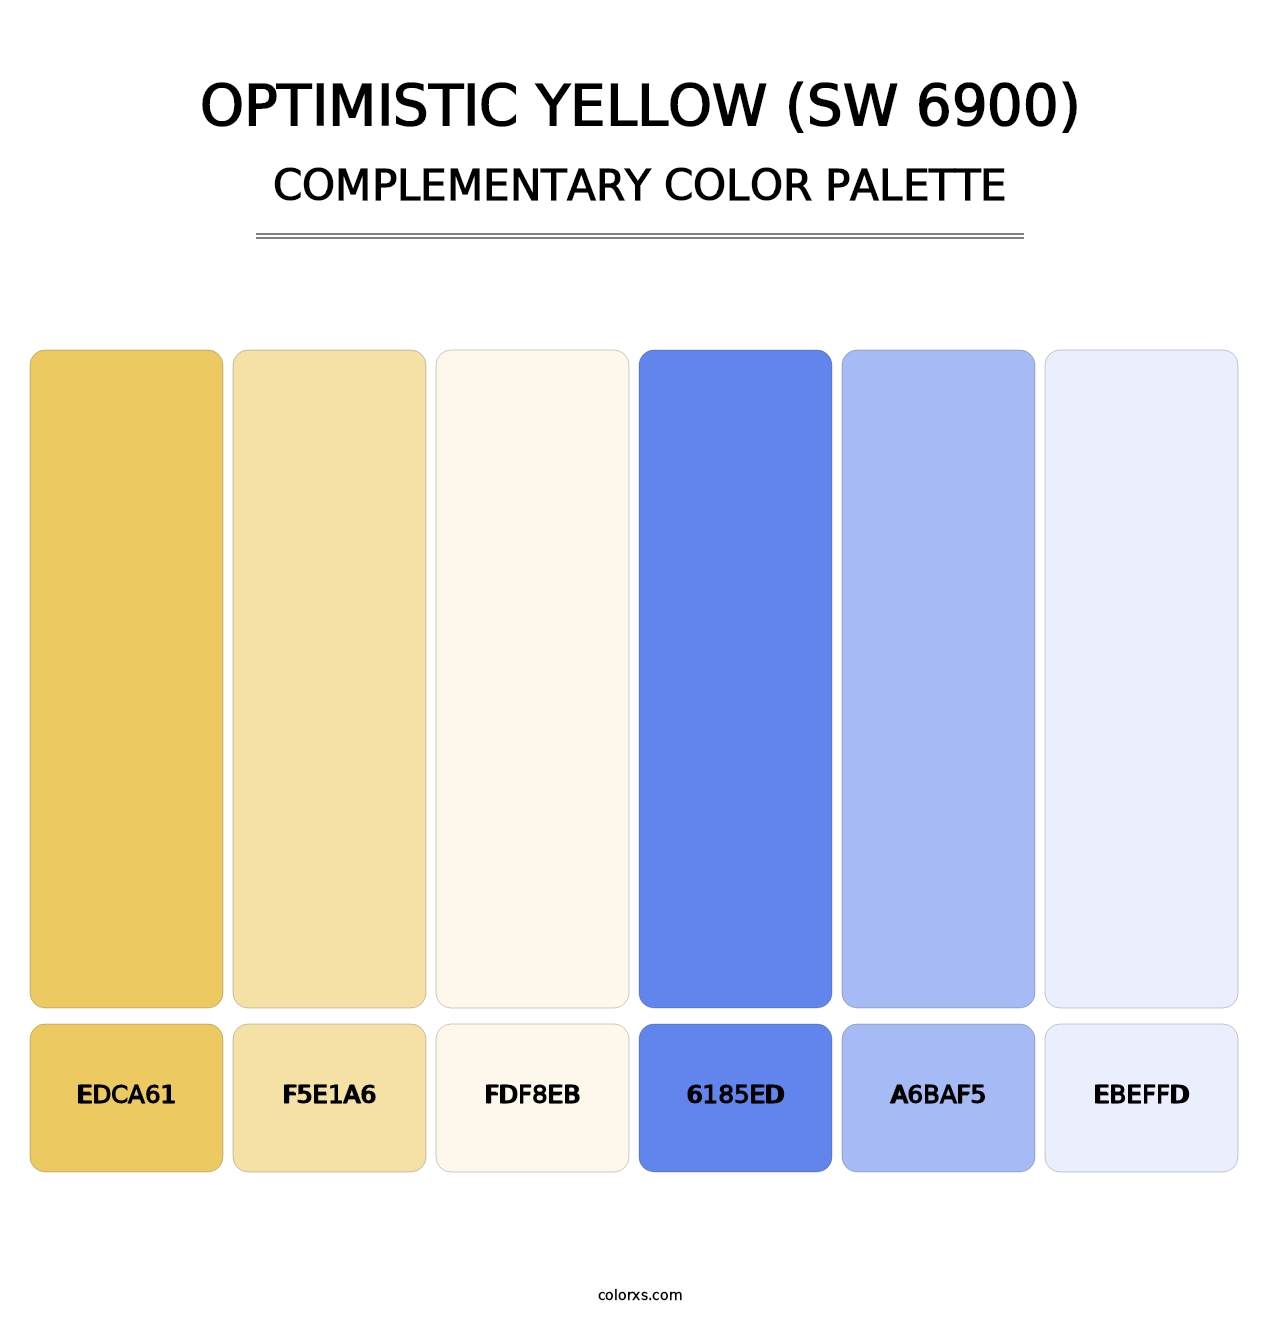 Optimistic Yellow (SW 6900) - Complementary Color Palette